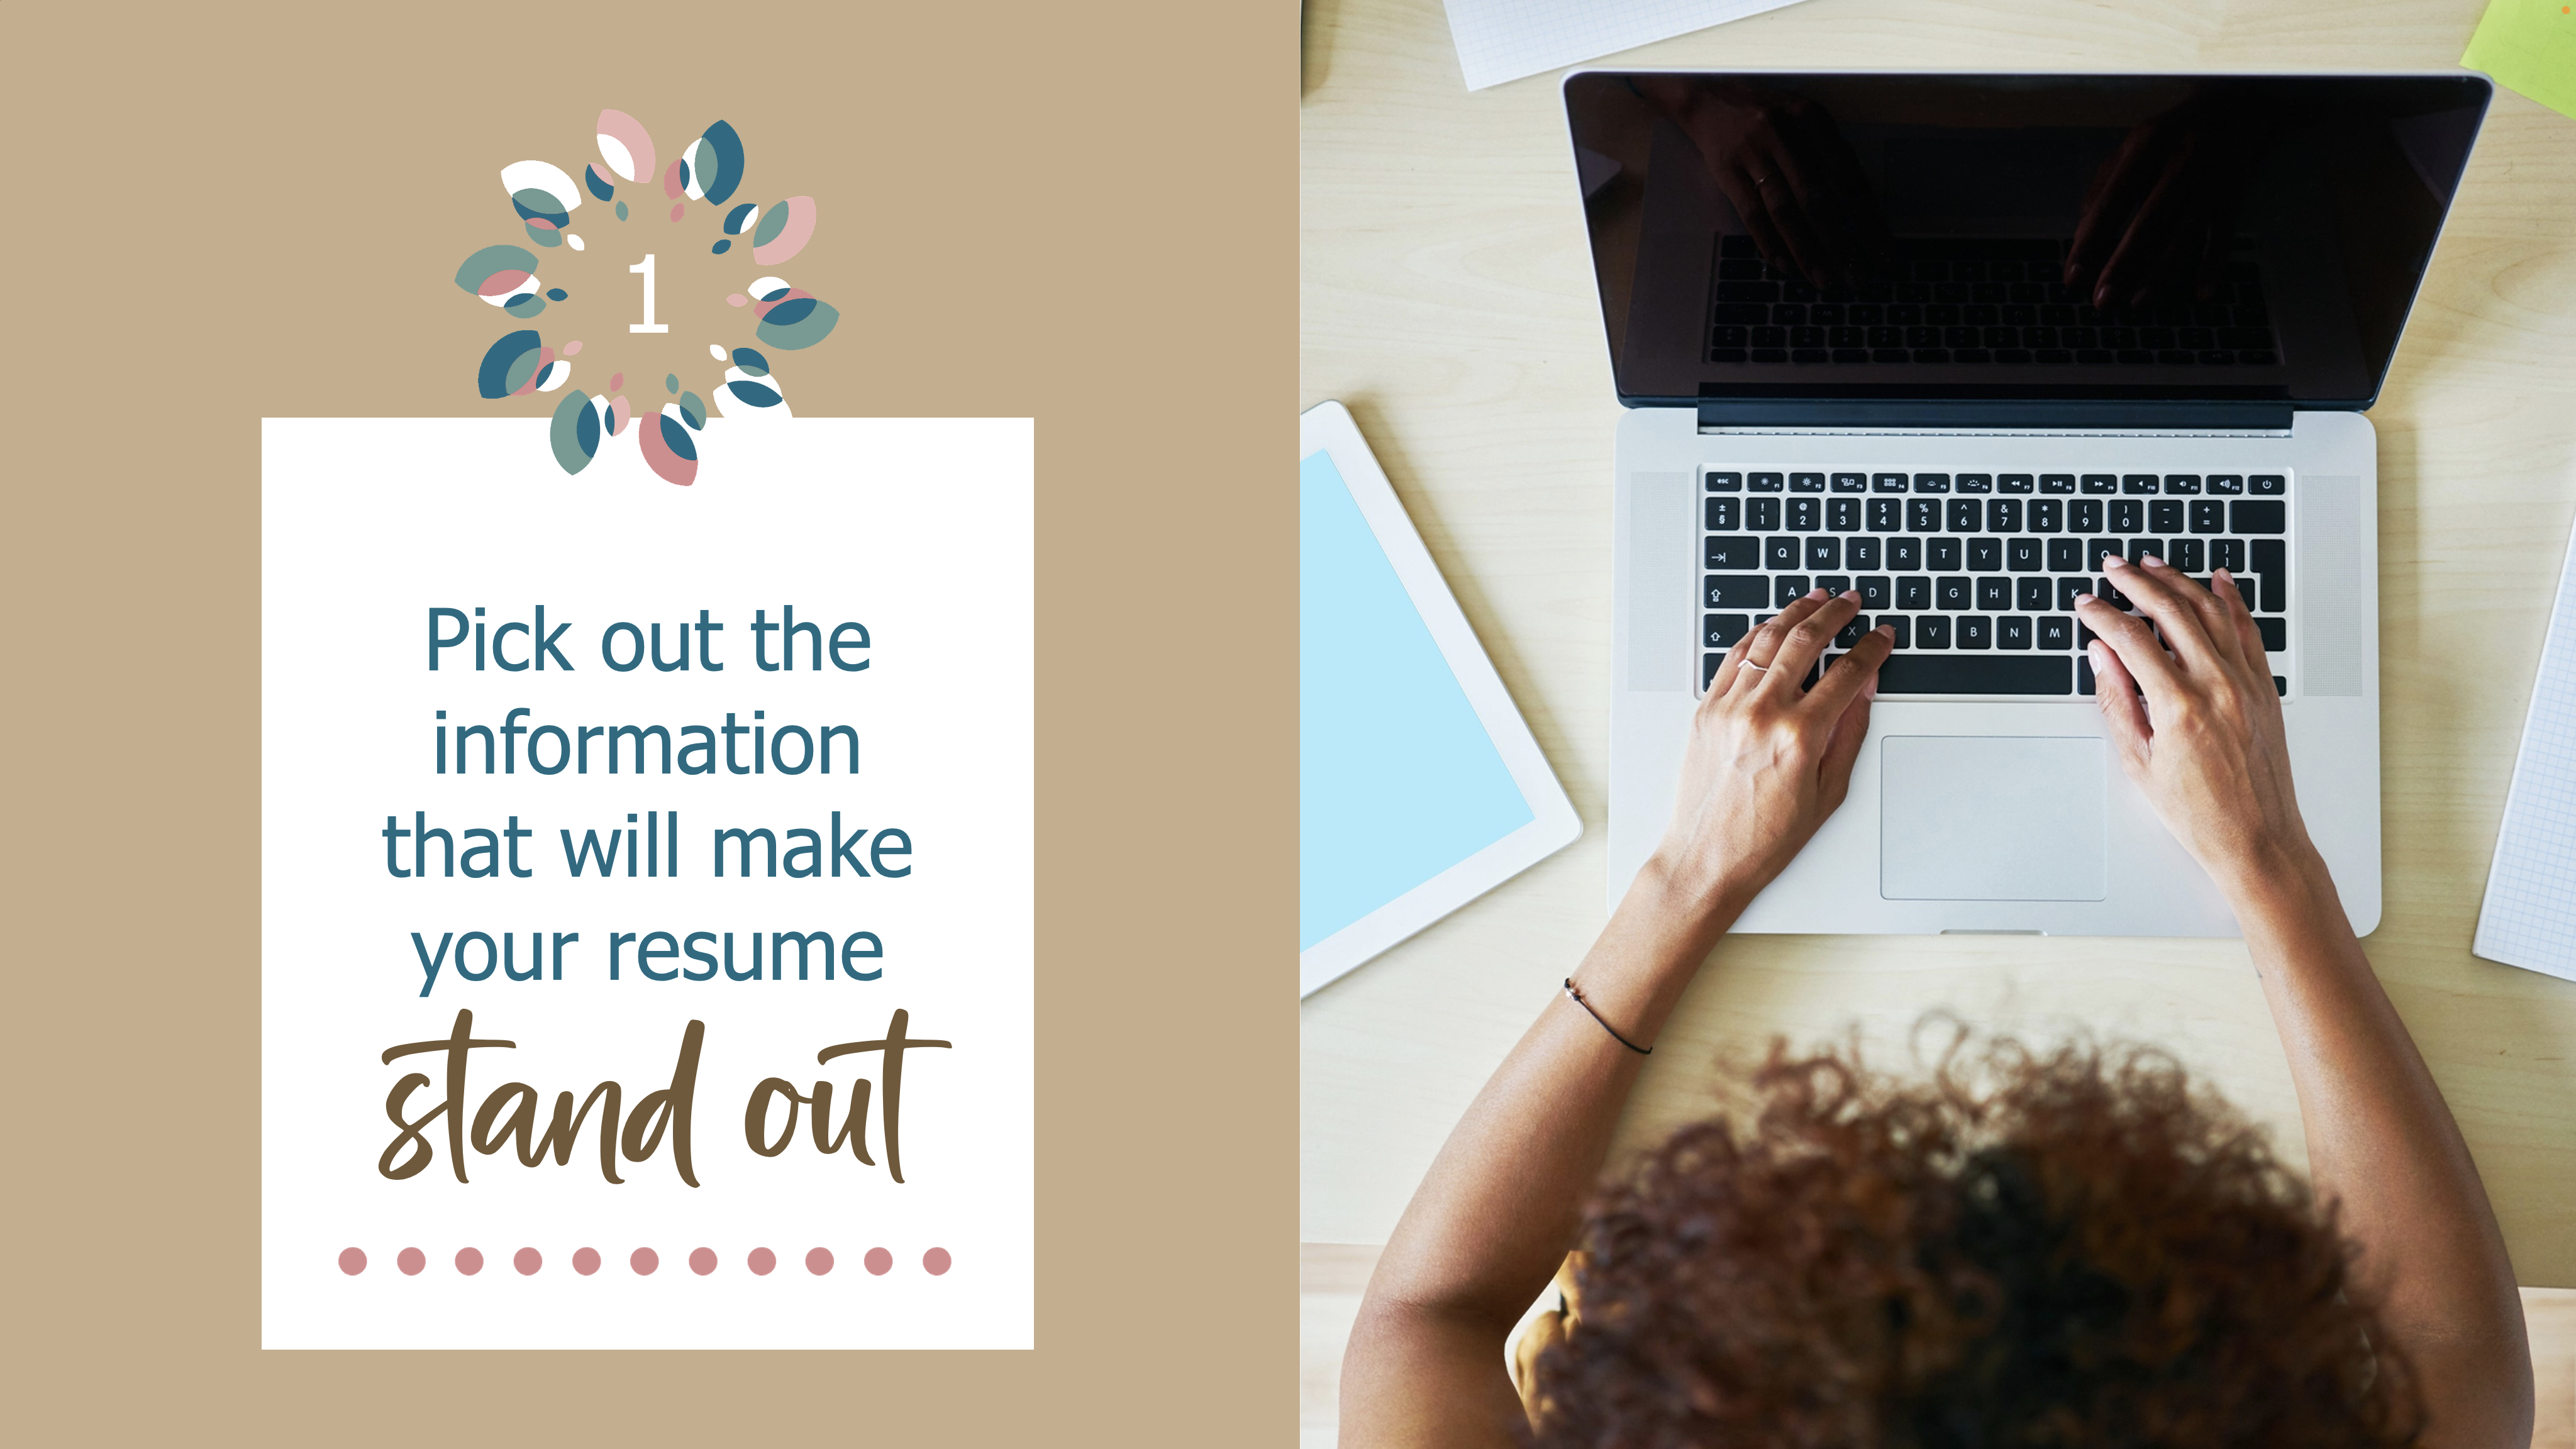 Learn how to pick out the information that will make your resume stand out